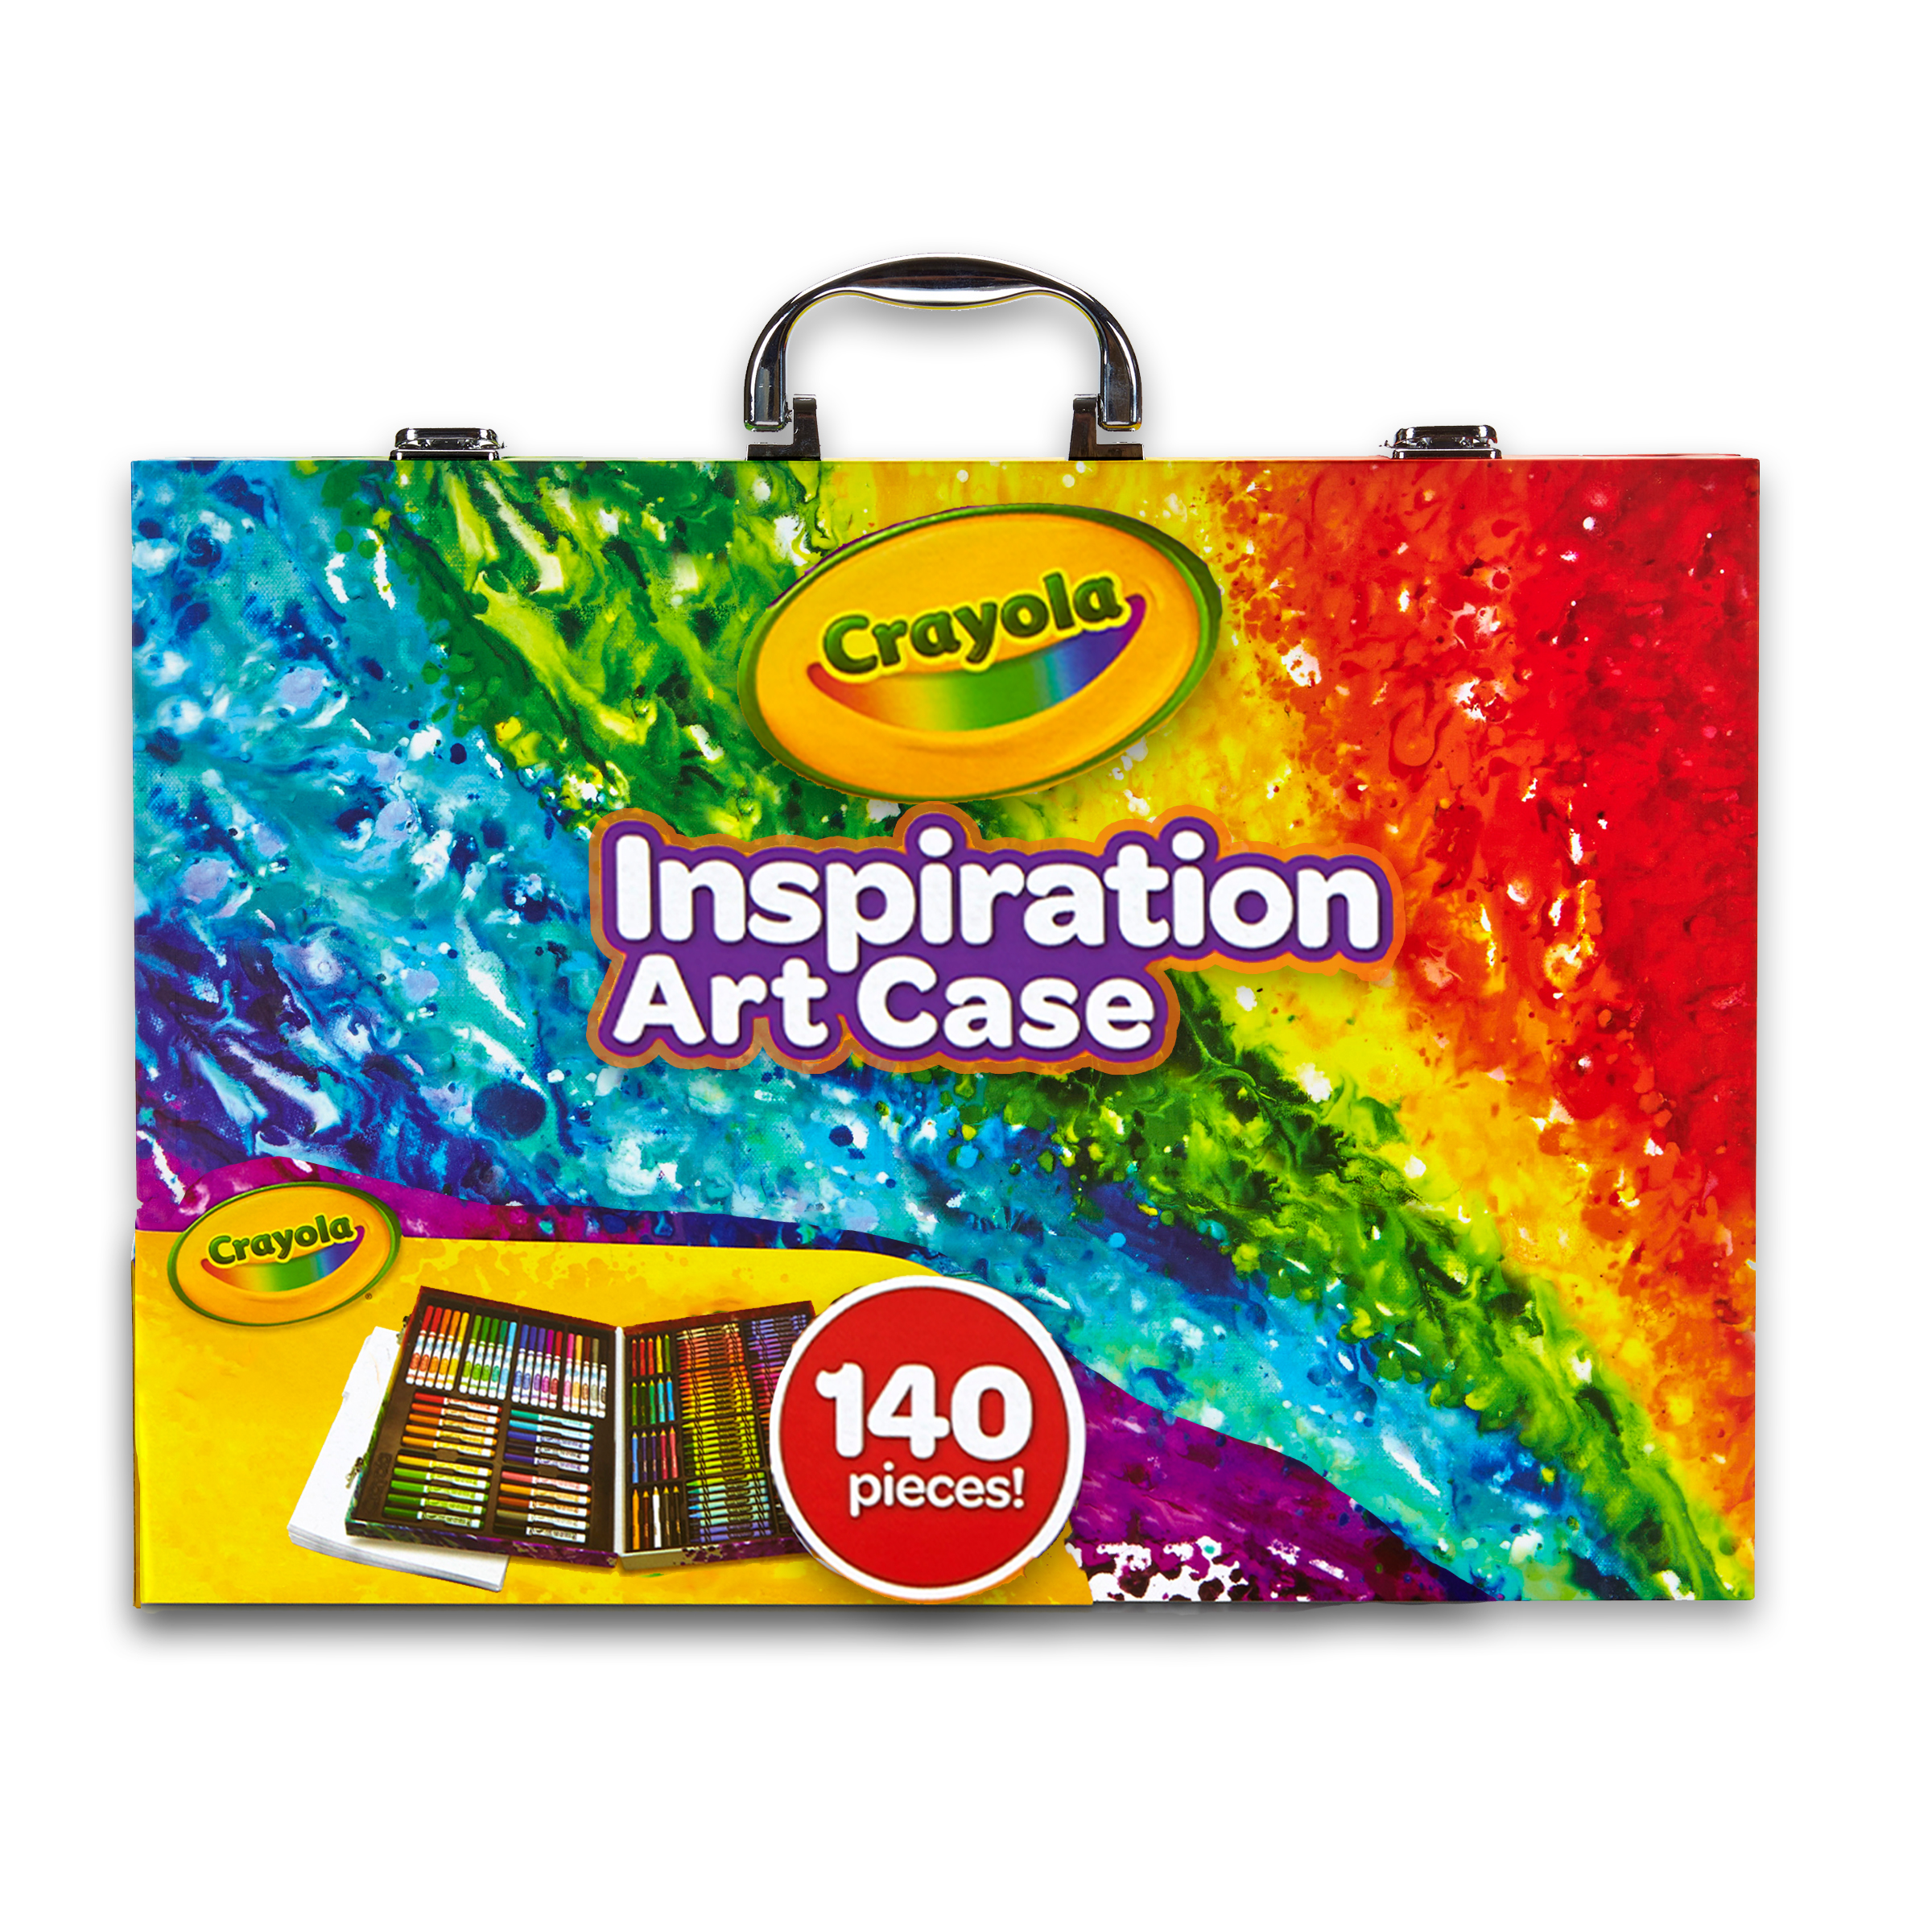 Crayola Inspiration Art Case, 140 Pieces, Assorted Colors, Gifts for Kids - image 1 of 8